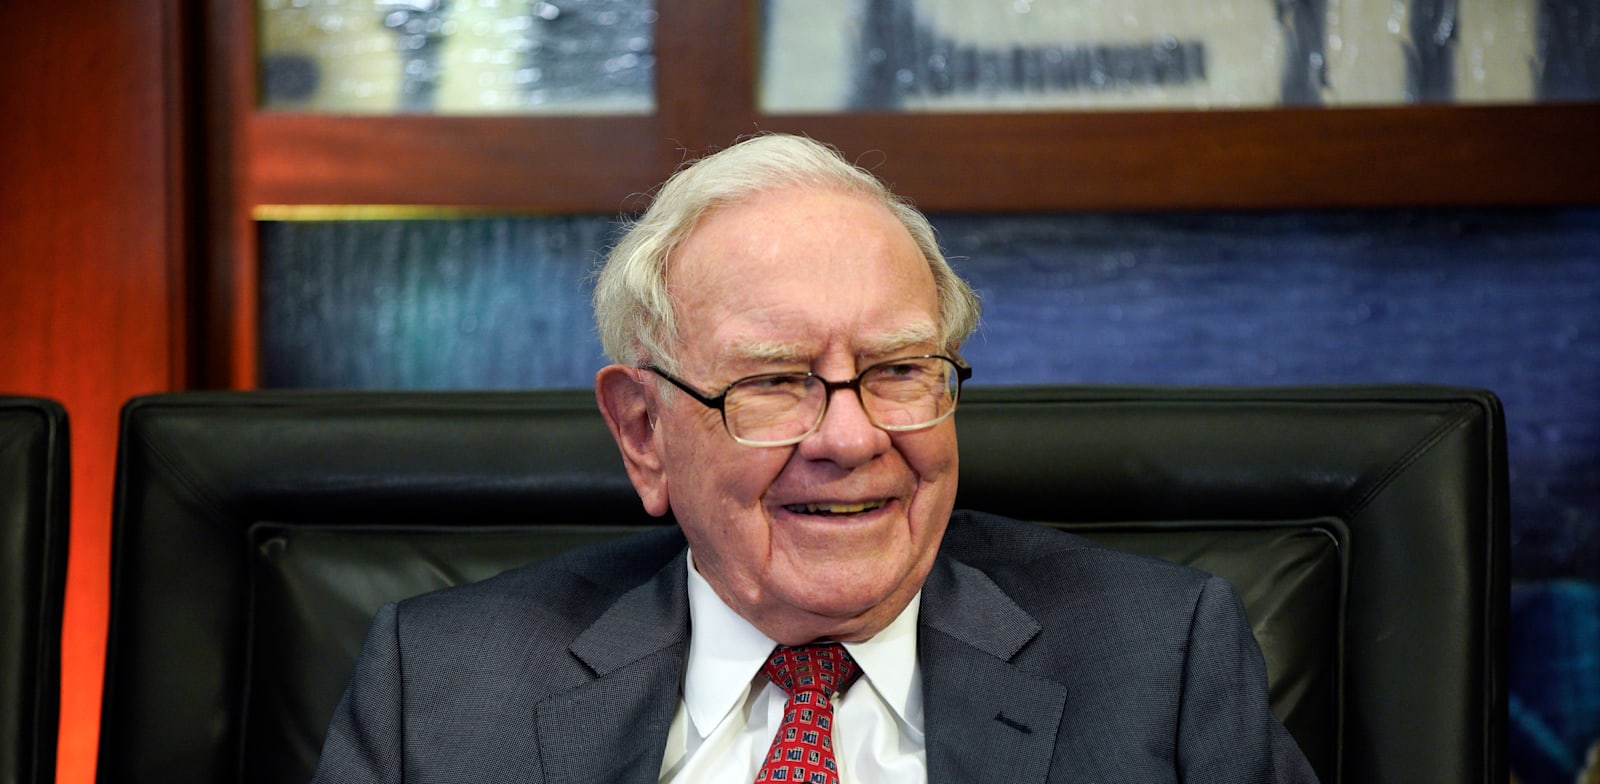 The Latest Investment by Warren Buffett and the Record about to be Shattered